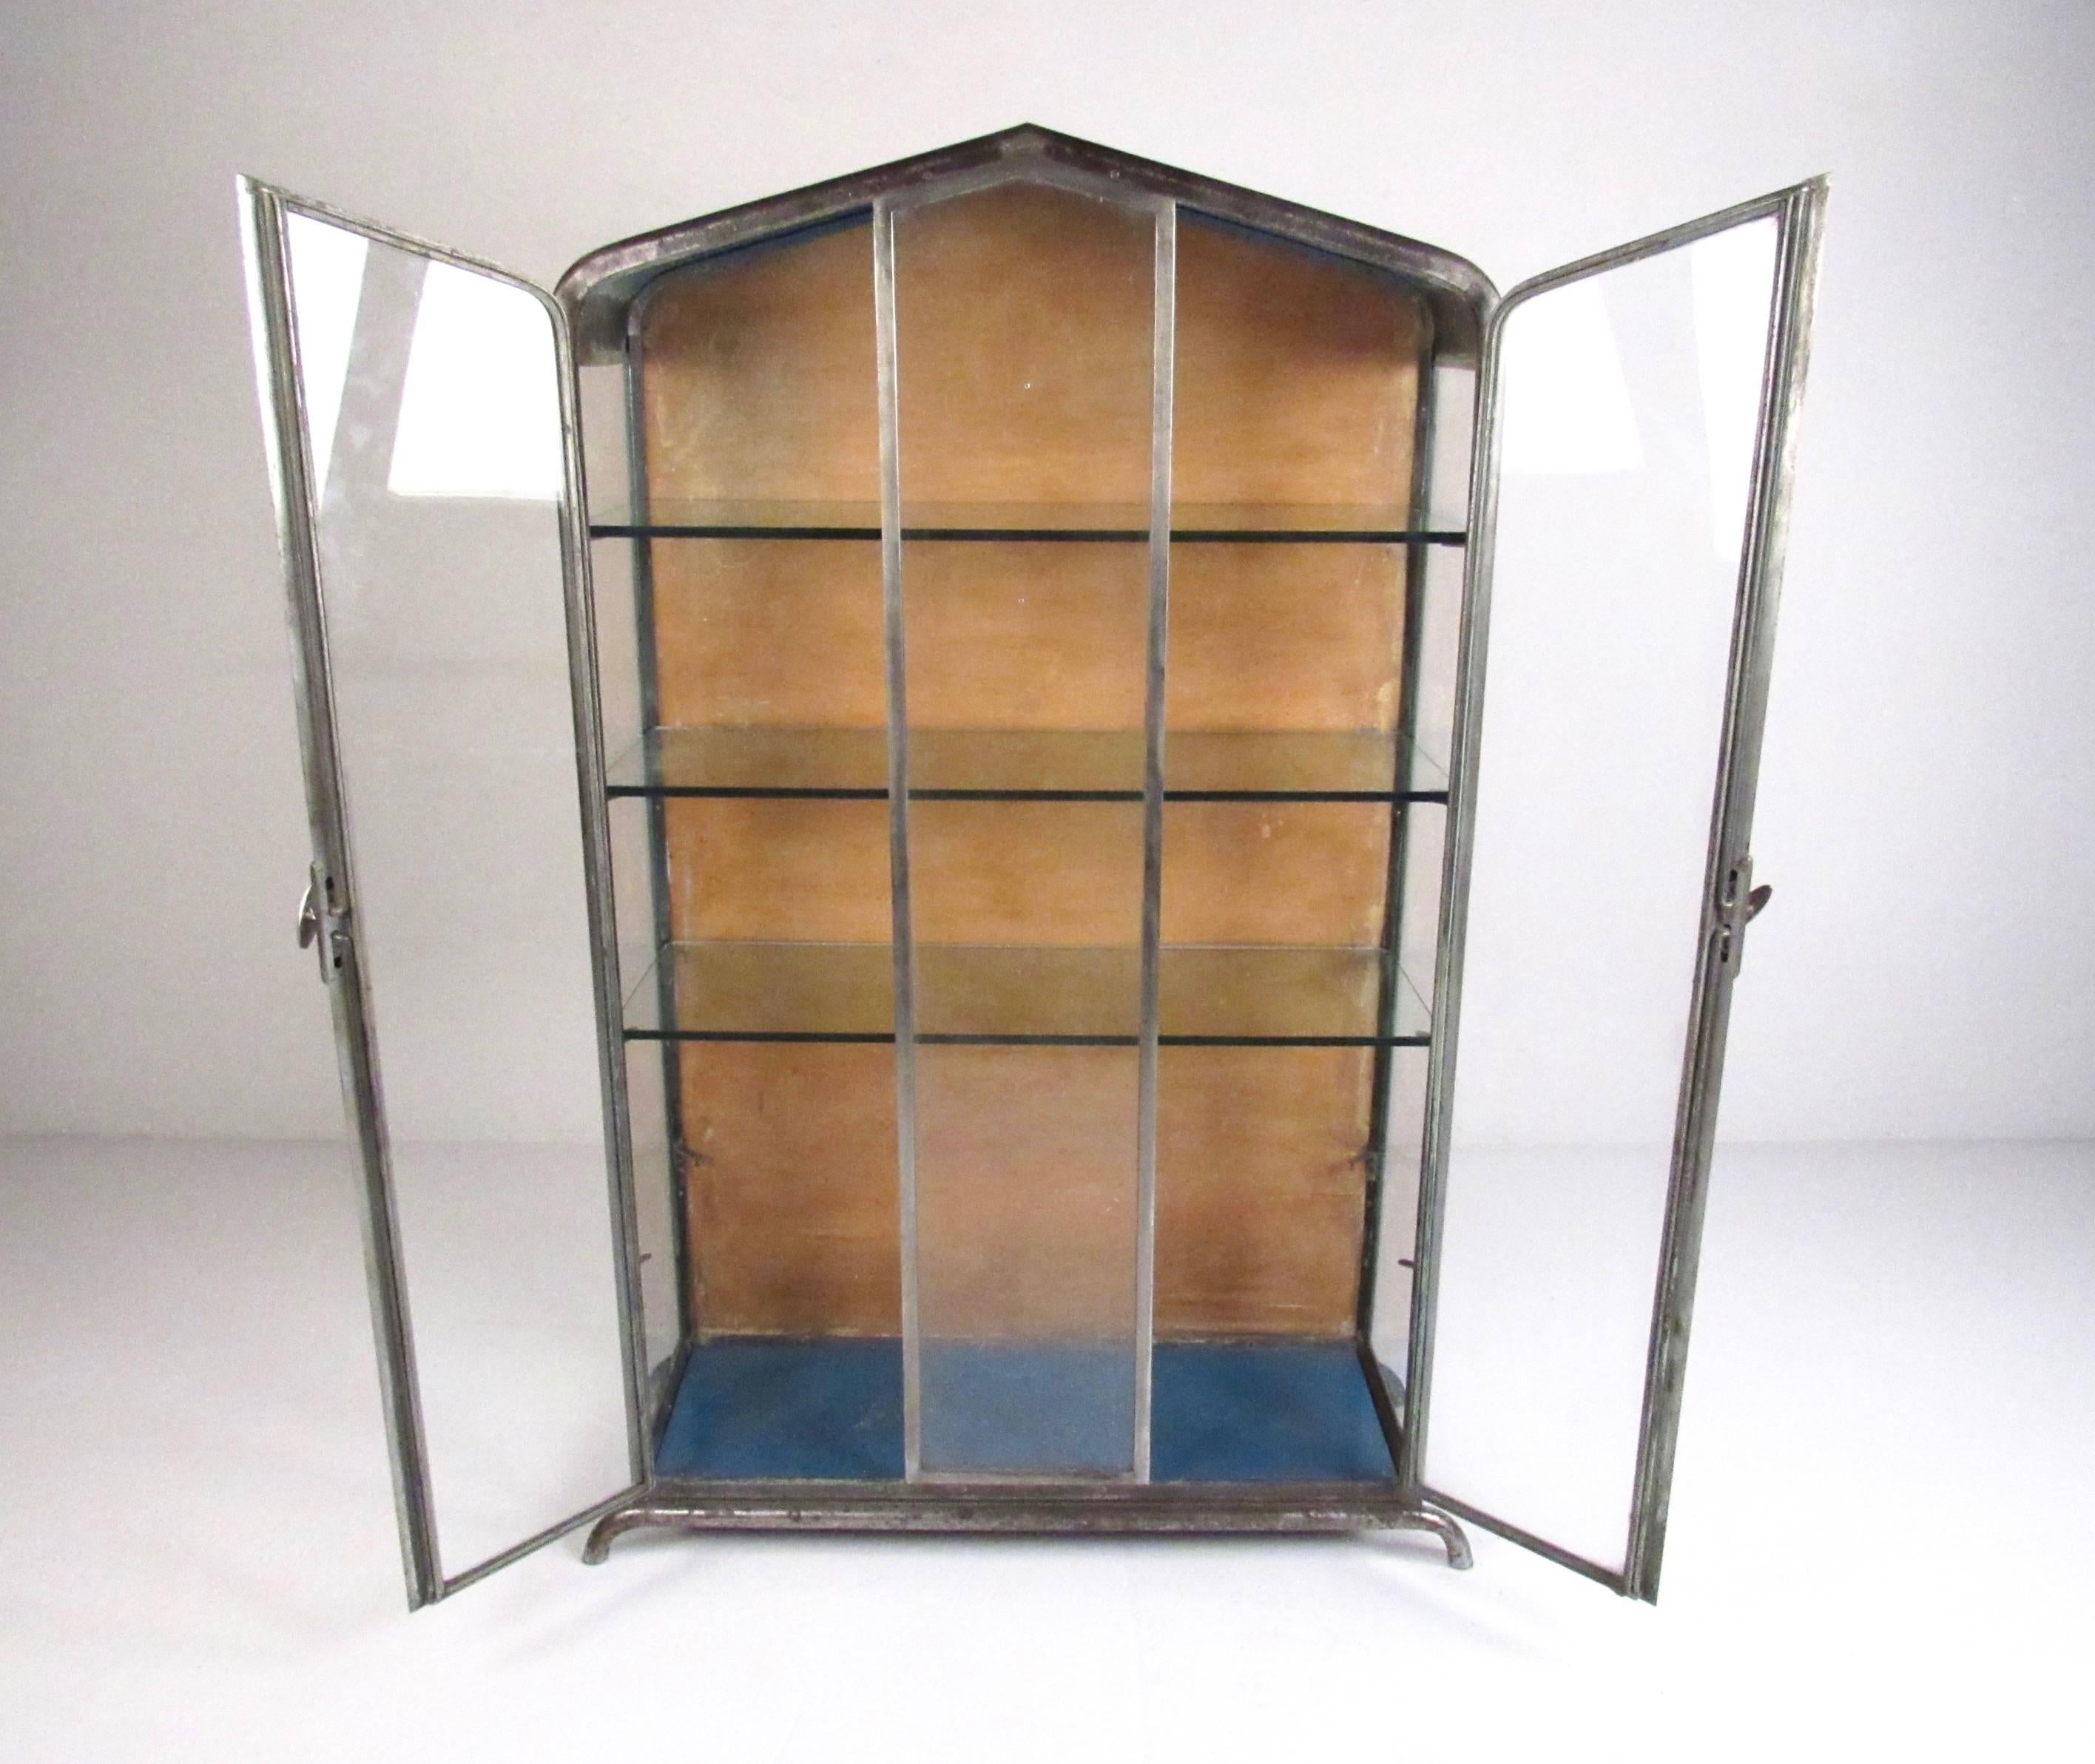 This unique deco style vitrine display case is constructed from Industrial metal with glass shelves and casing. Unique shape offers plenty of visibility making this the perfect piece for home or business display. Please confirm item location (NY or